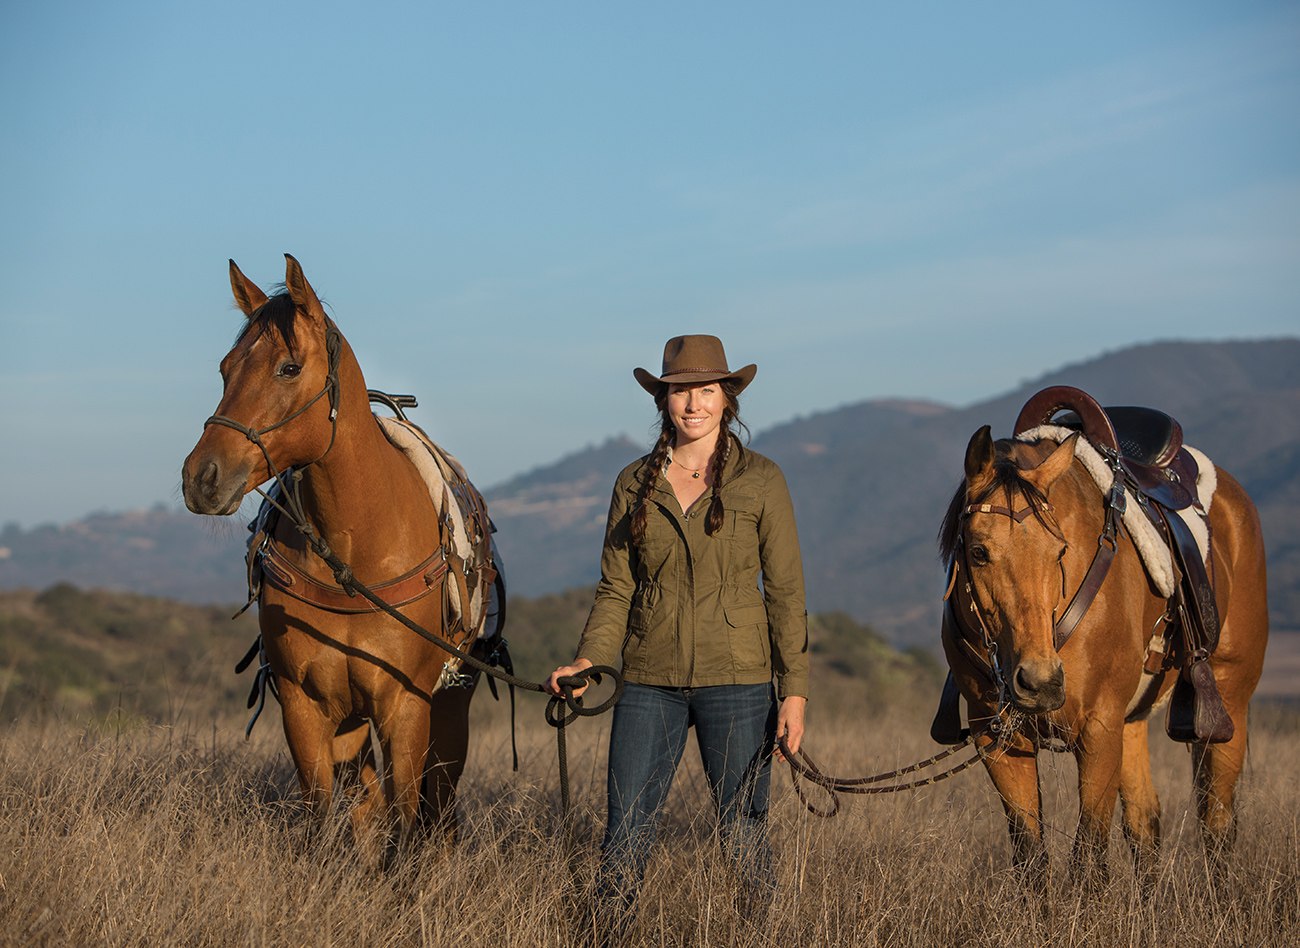 Gillian with her horses, Takoda and Shyla, in 2019